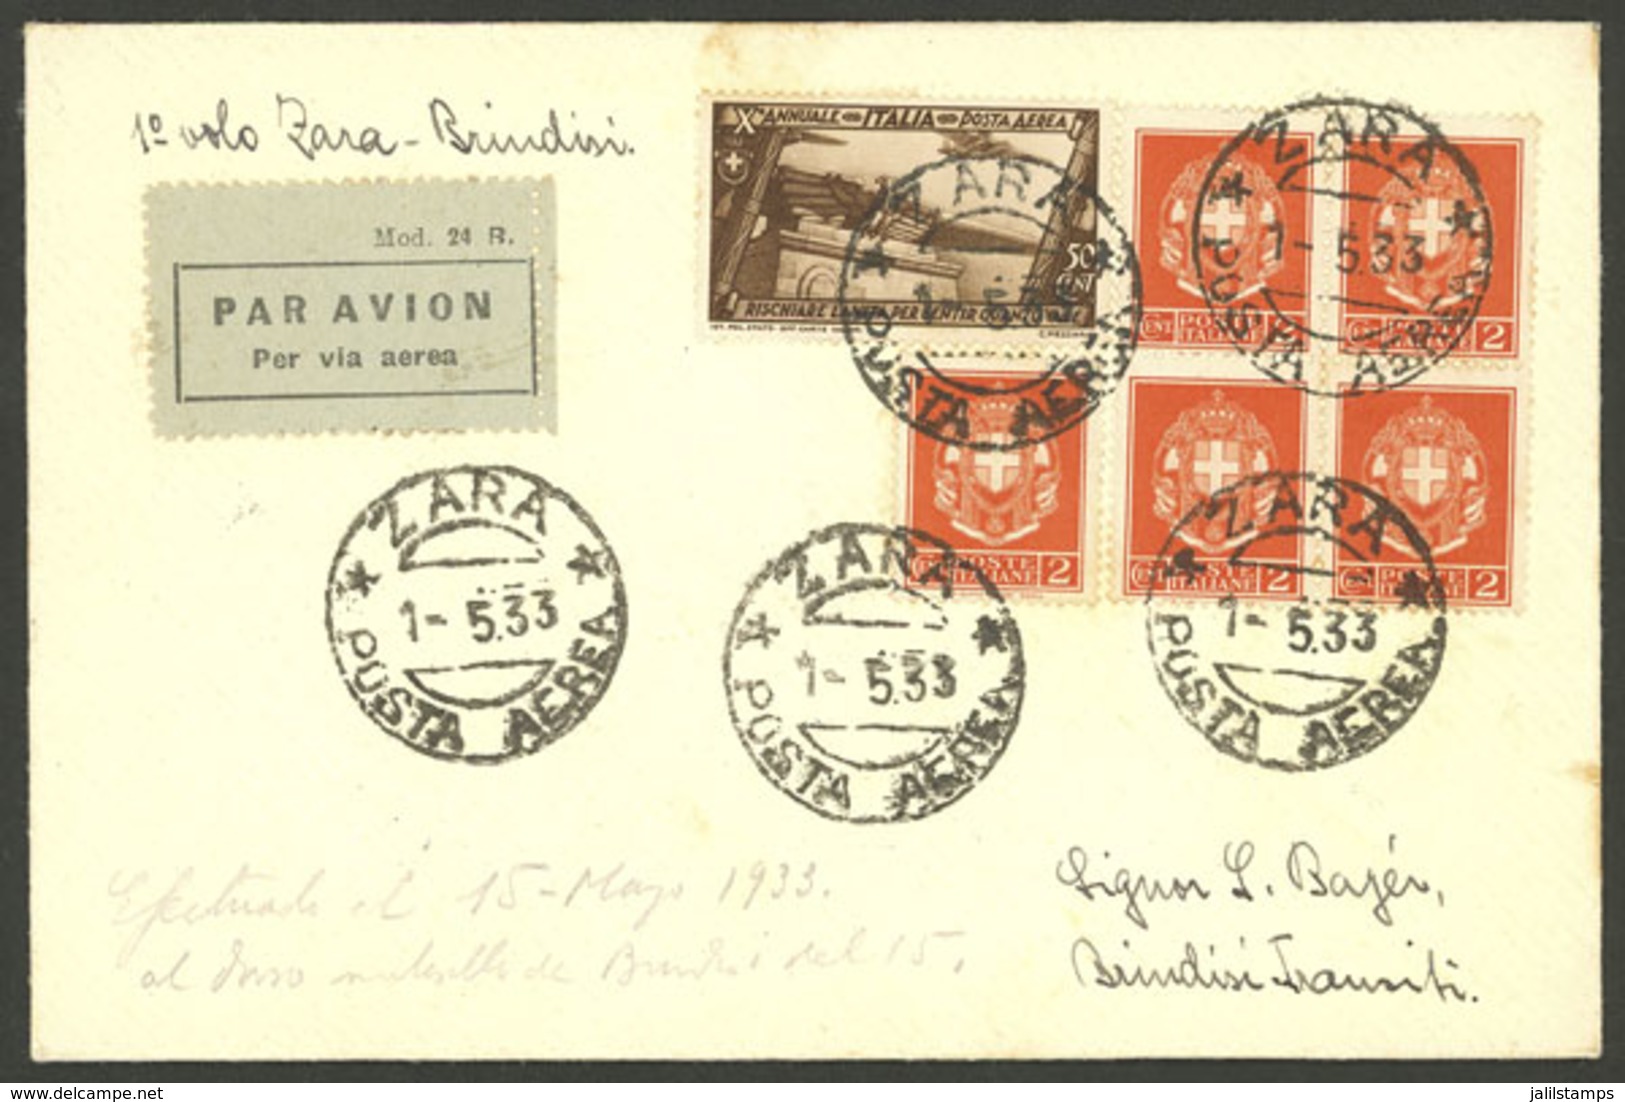 ITALY: 15/MAY/1933 Zara - Brindisi, First Flight, Cover With Arrival Backstamp, VF Quality! - Unclassified